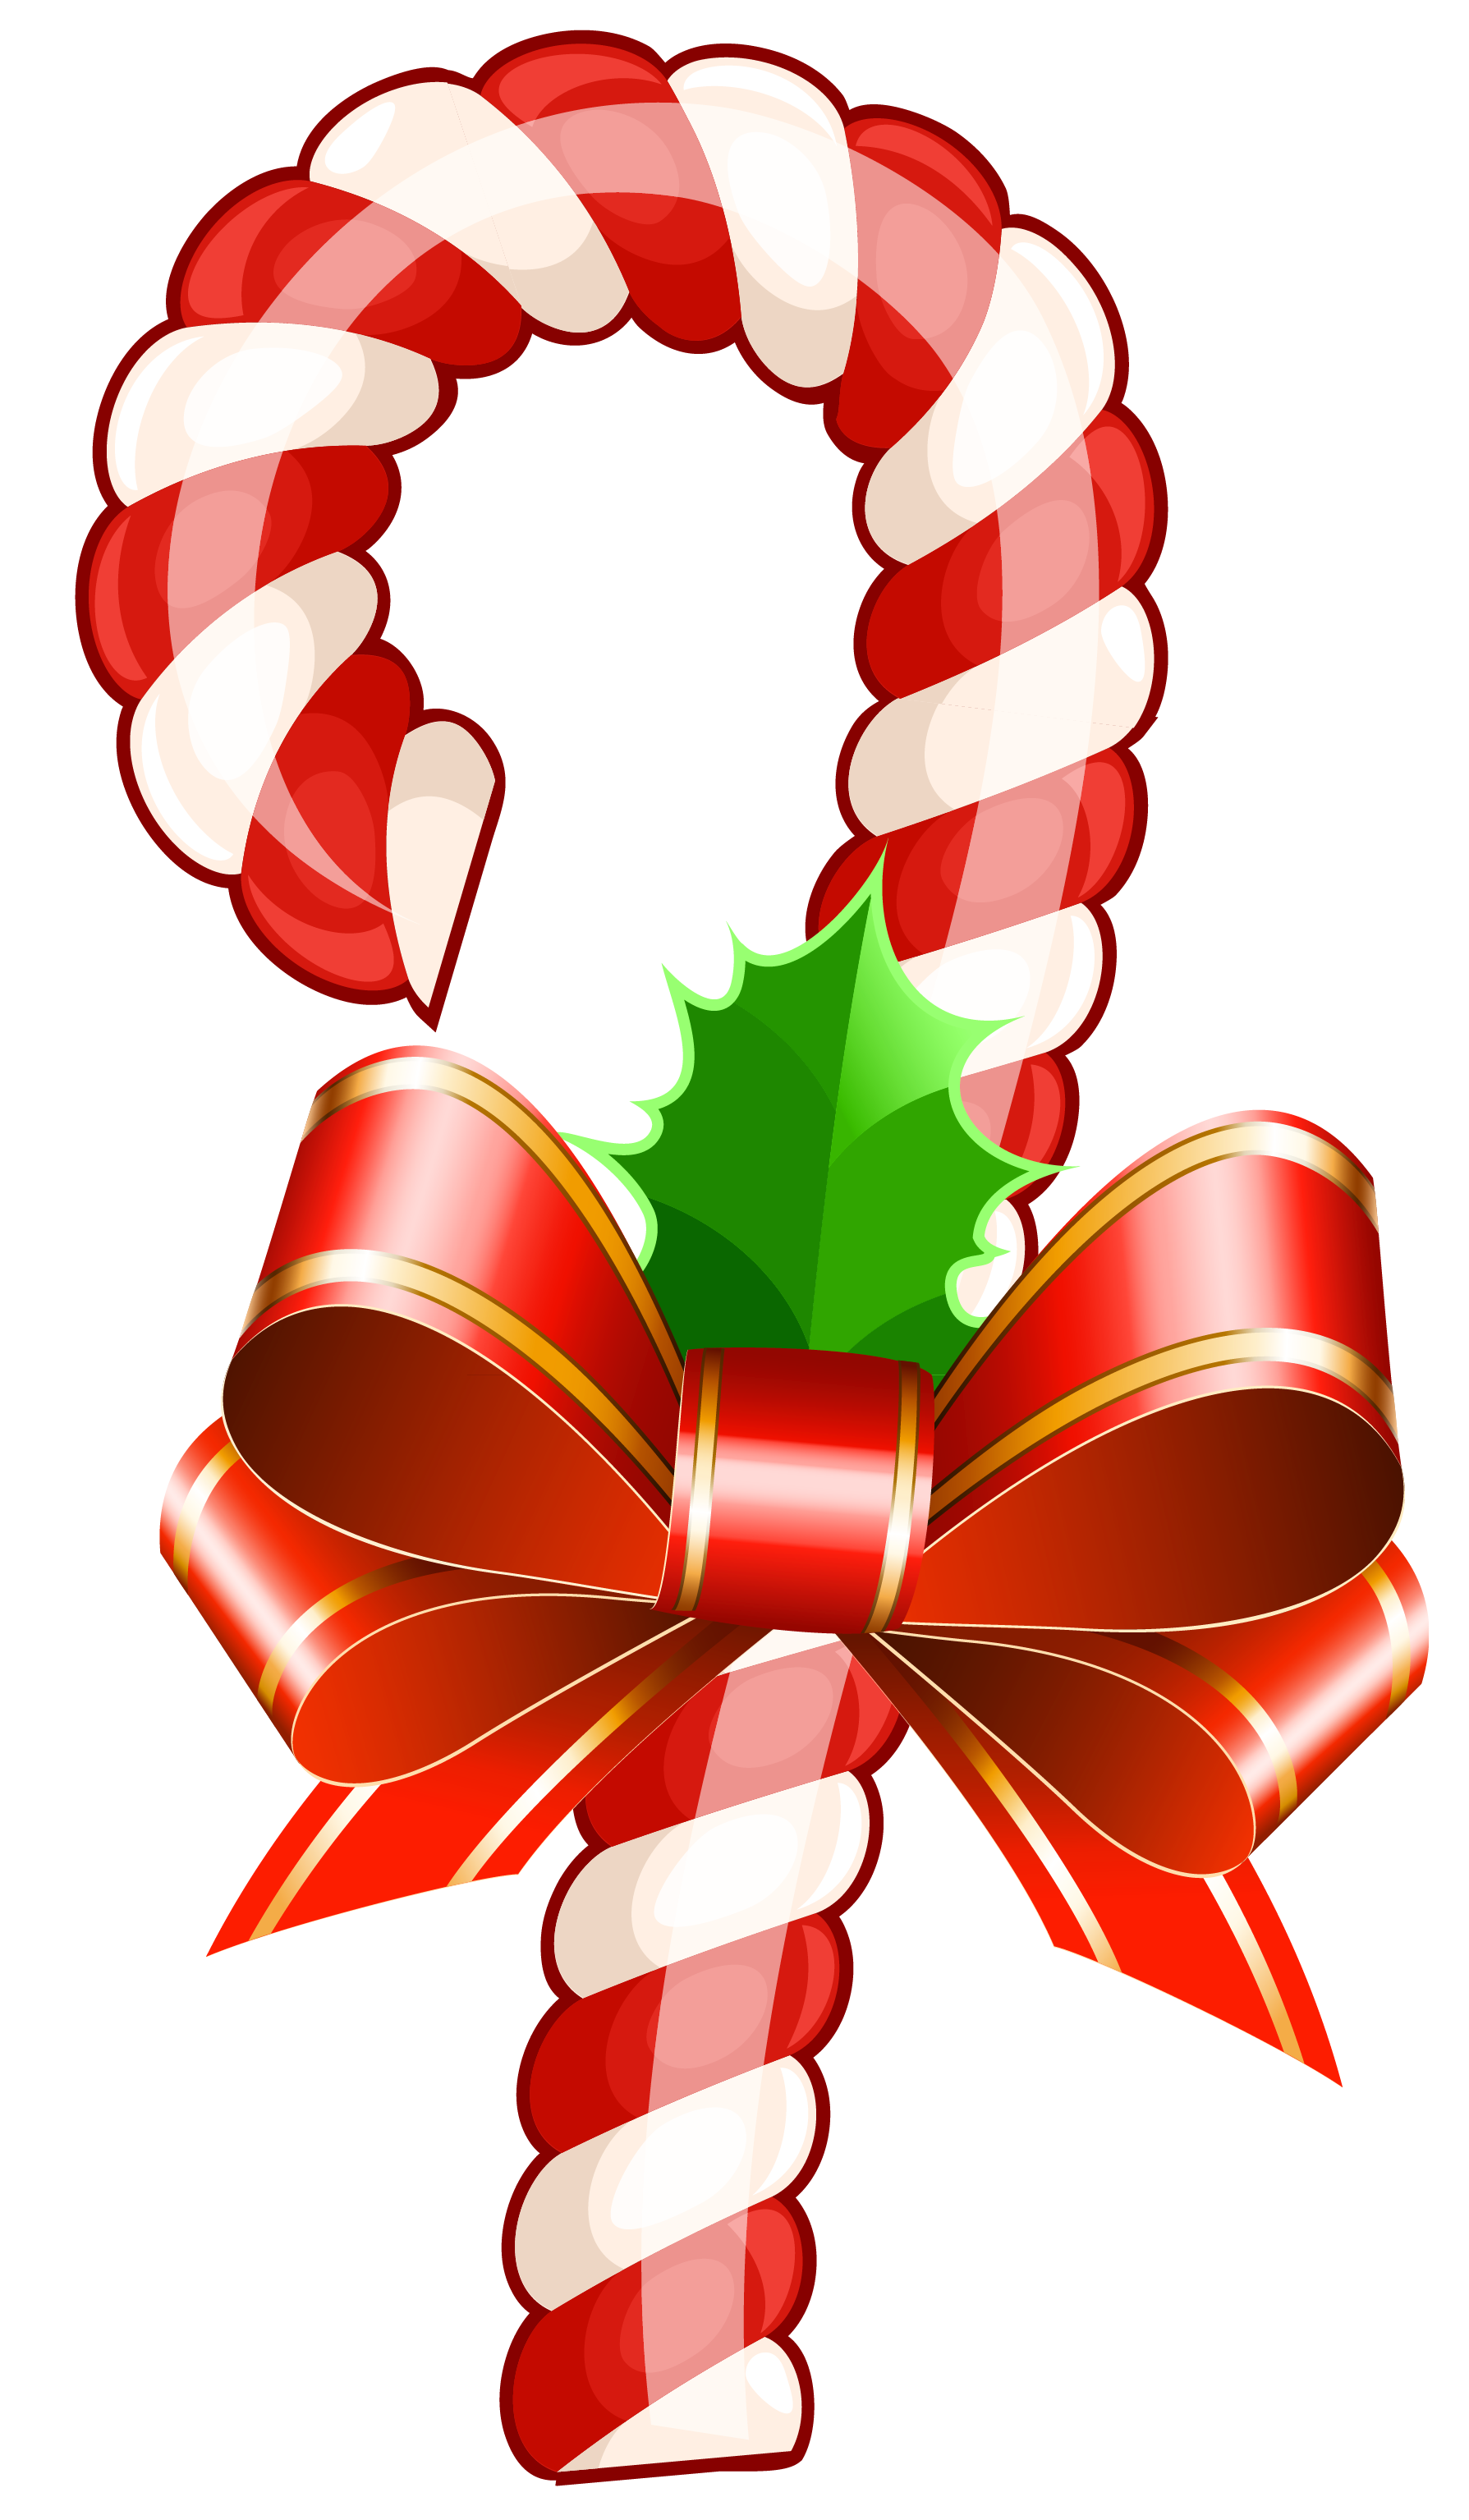 candy cane clipart png - Google Search